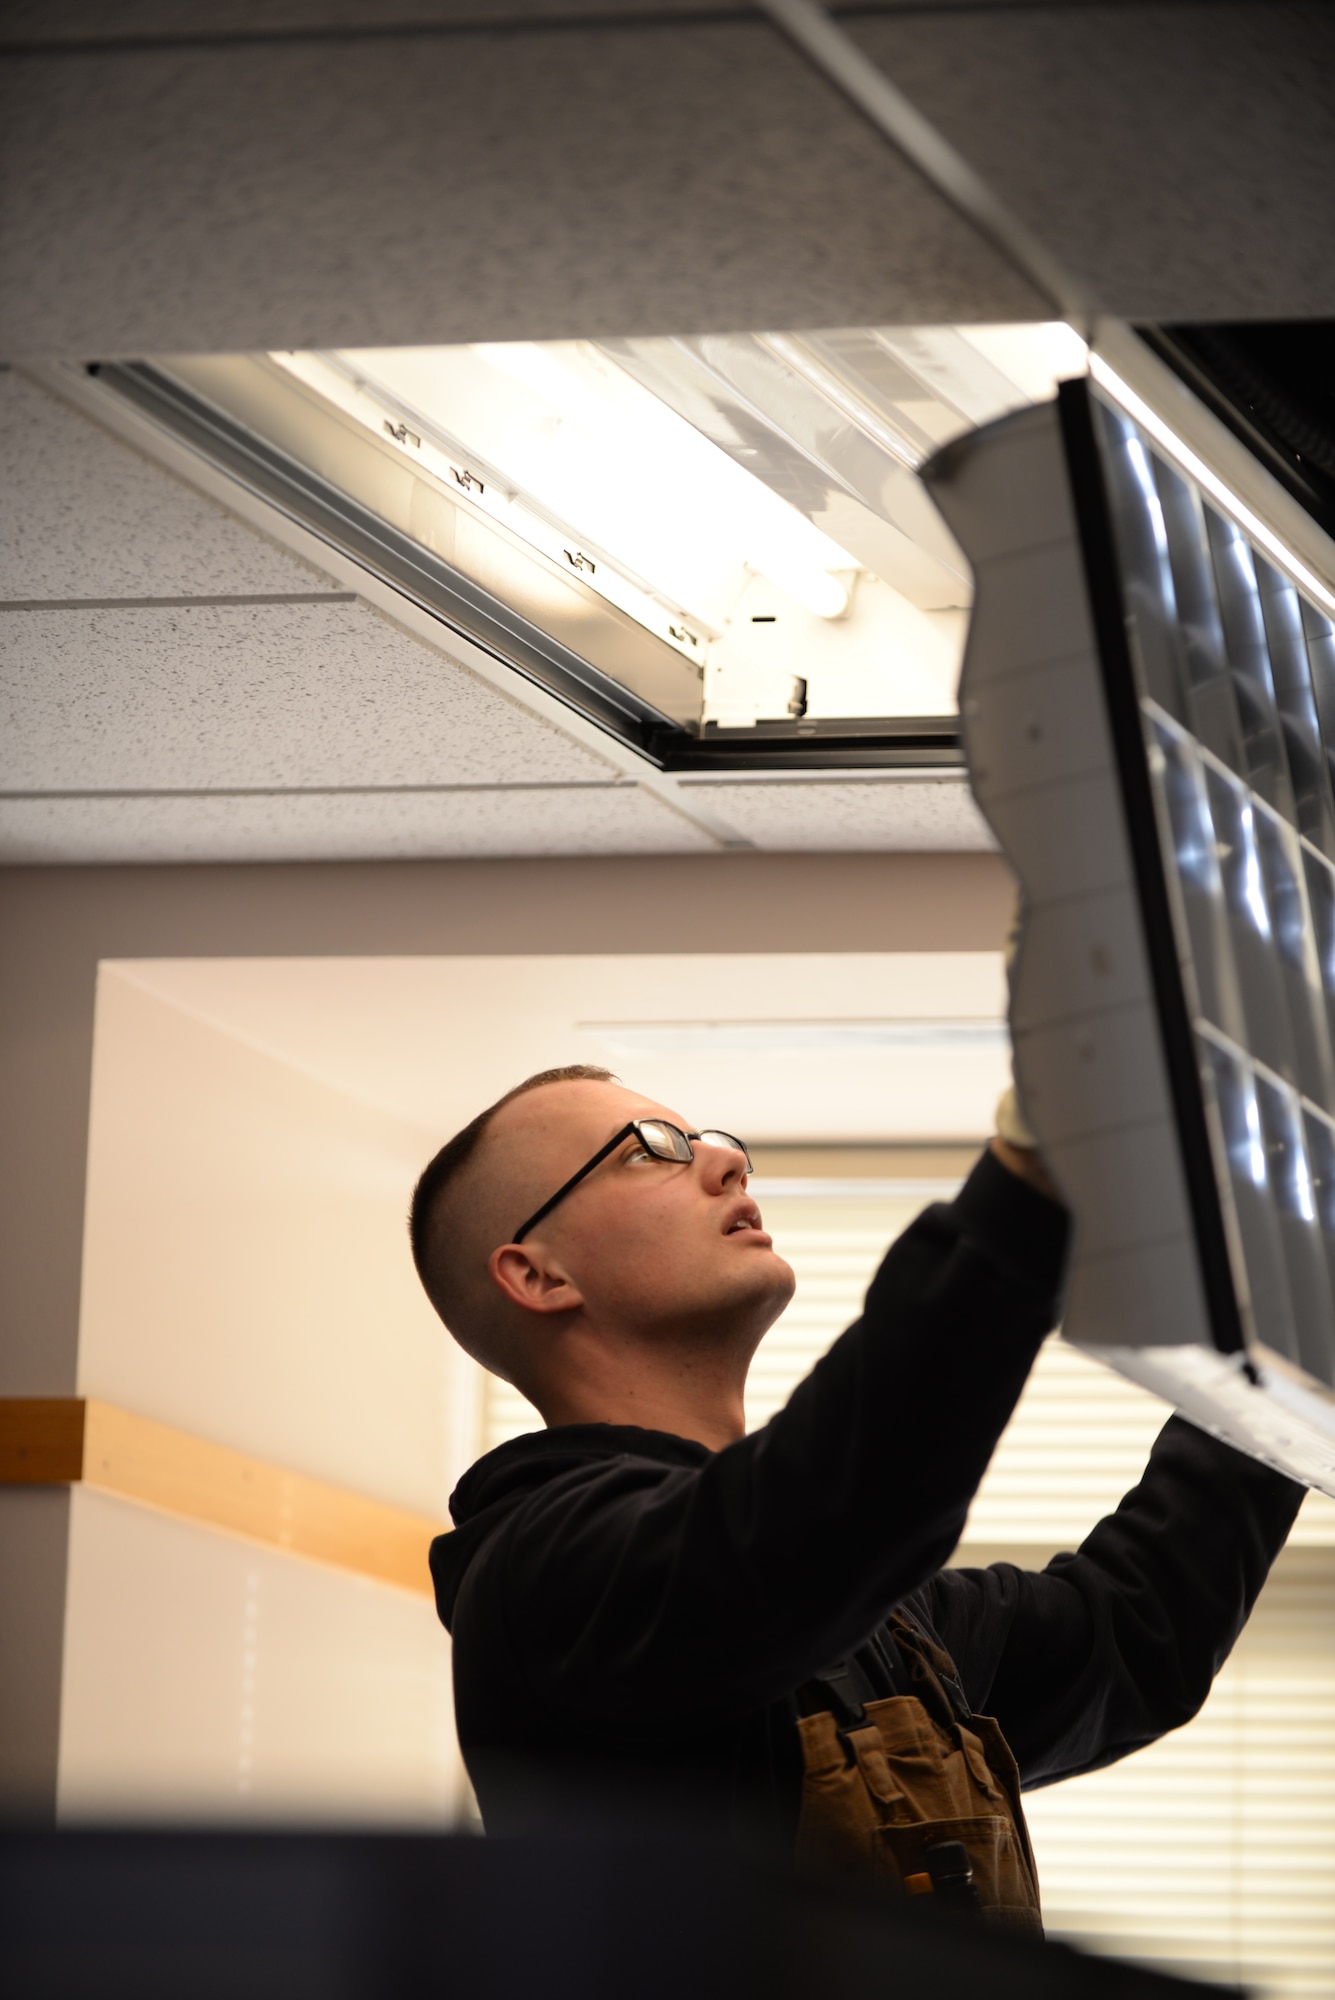 Senior Airman Daniel Hatfield, 28th Civil Engineer Squadron electrical systems technician, closes a diffuser to a light fixture at Ellsworth Air Force Base, S.D., Jan. 26, 2016. Diffusers are used to separate and lessen the harshness of light emitted by the bulb. (U.S. Air Force photo by Airman Sadie Colbert/Released)